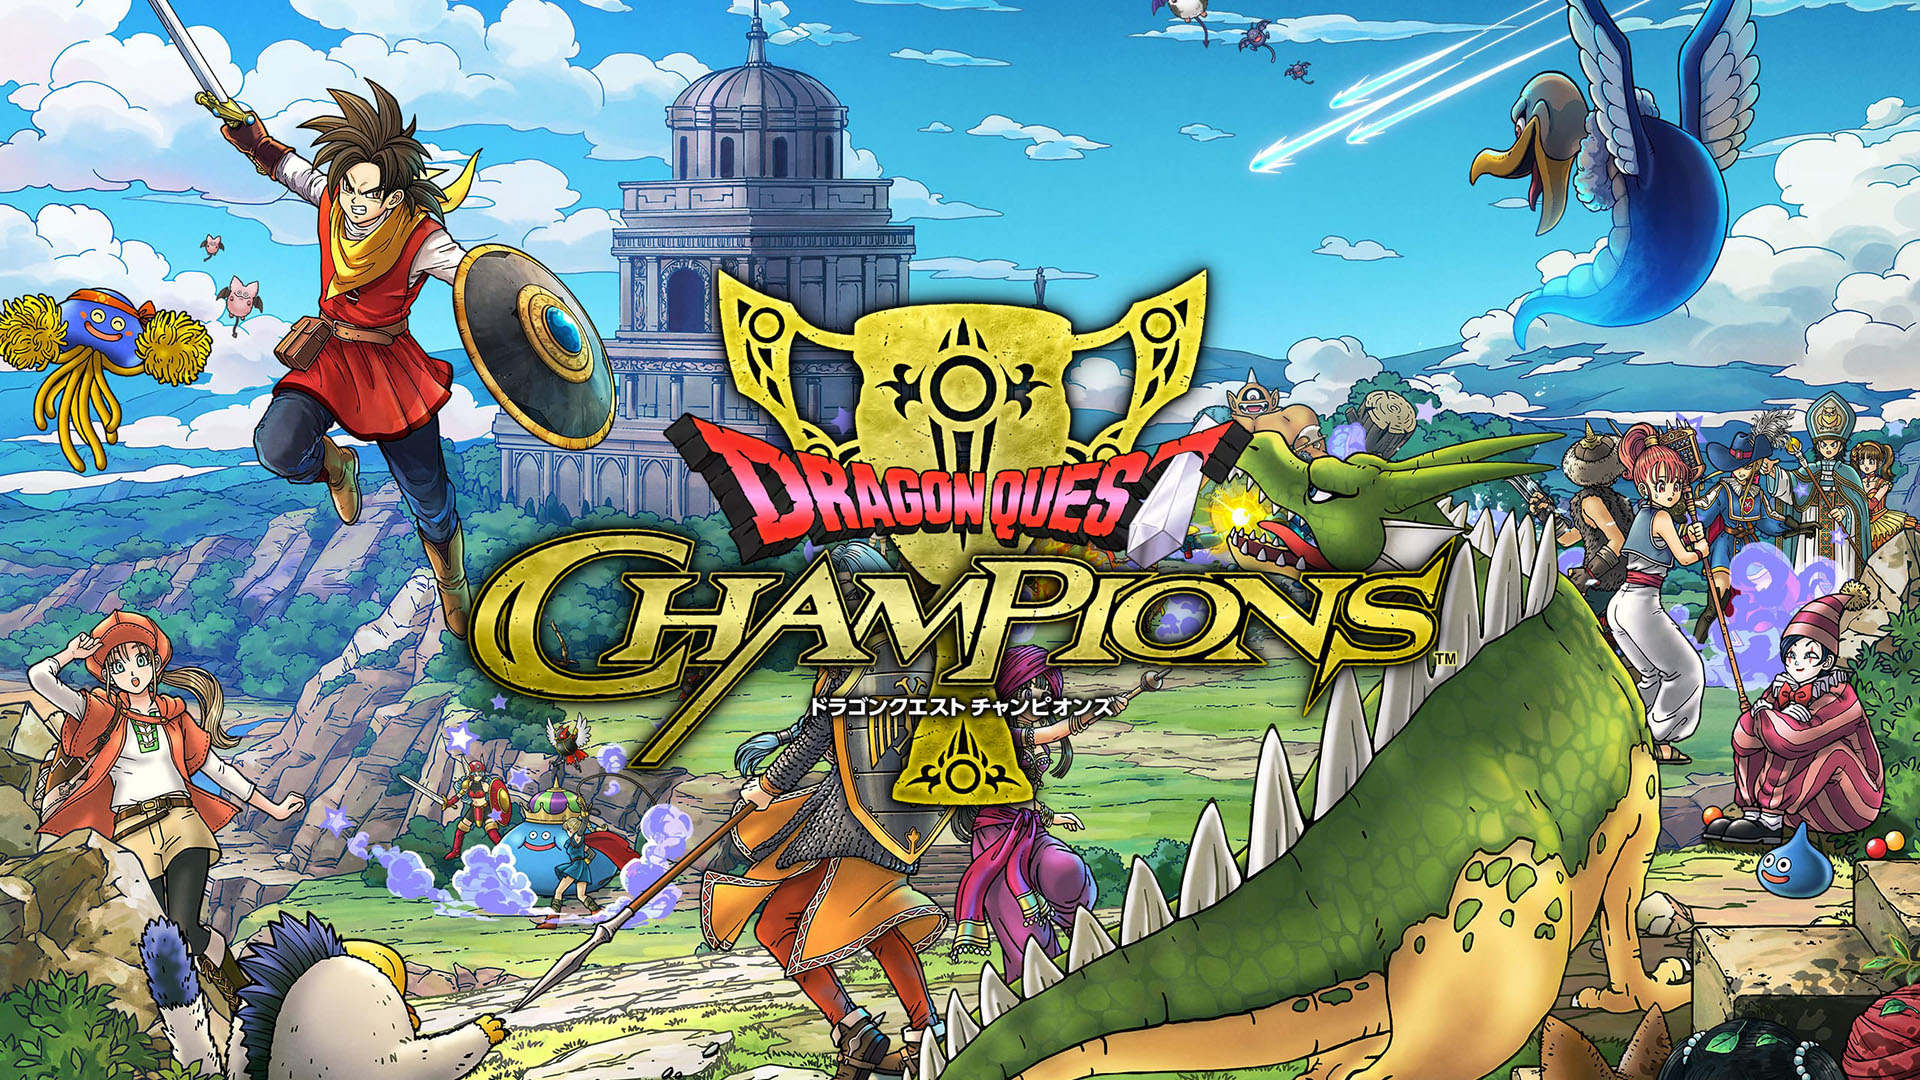 Dragon Quest Champions Announced for Mobile; CBT Begins February 6